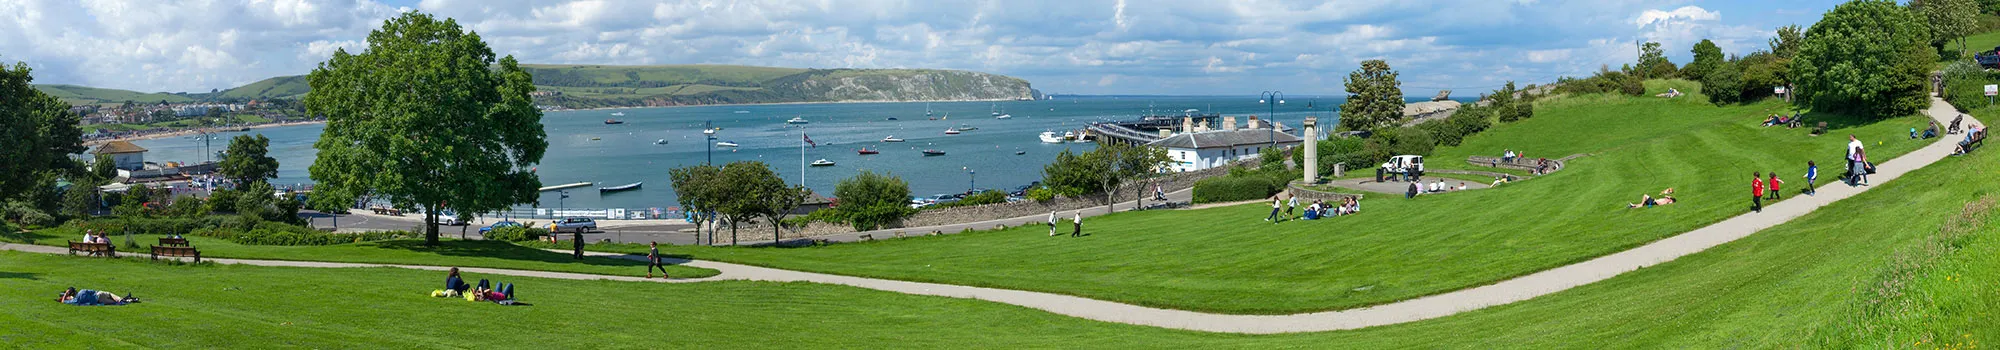 Local information about the Isle of Purbeck